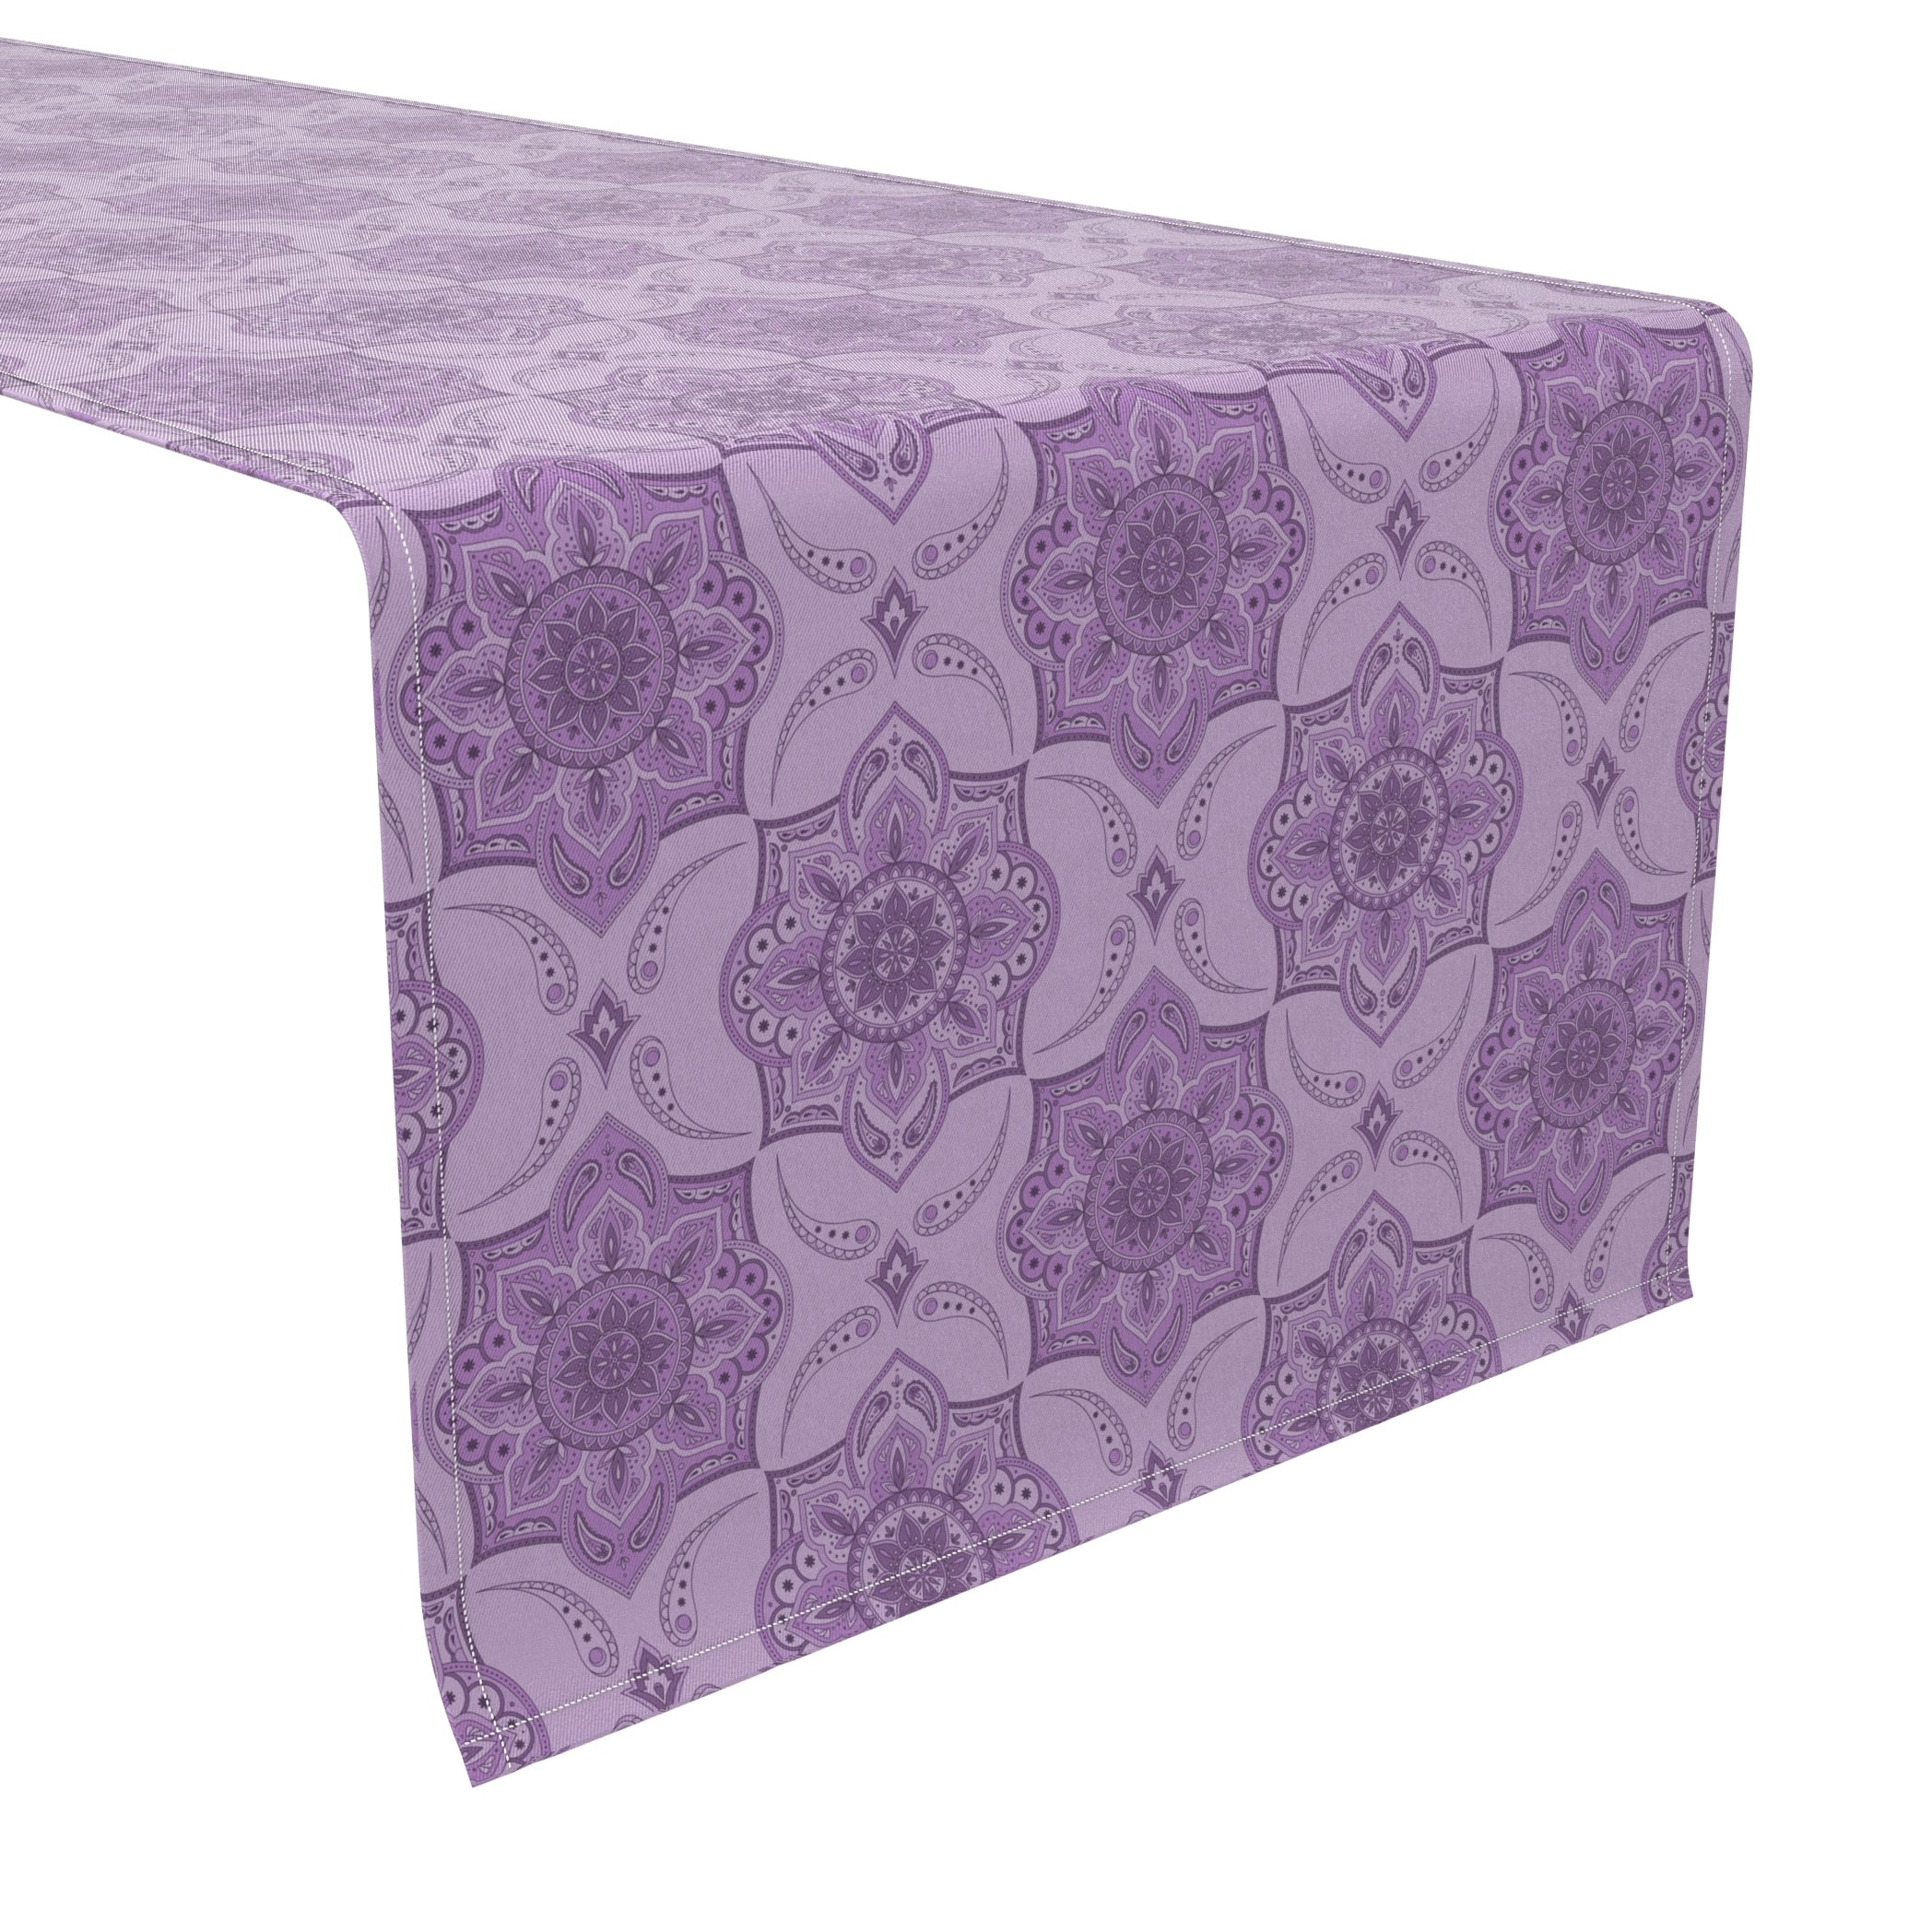 Fabric Textile Products, Inc. Table Runner, 100% Cotton, 16x108", Purple Damask Paisley